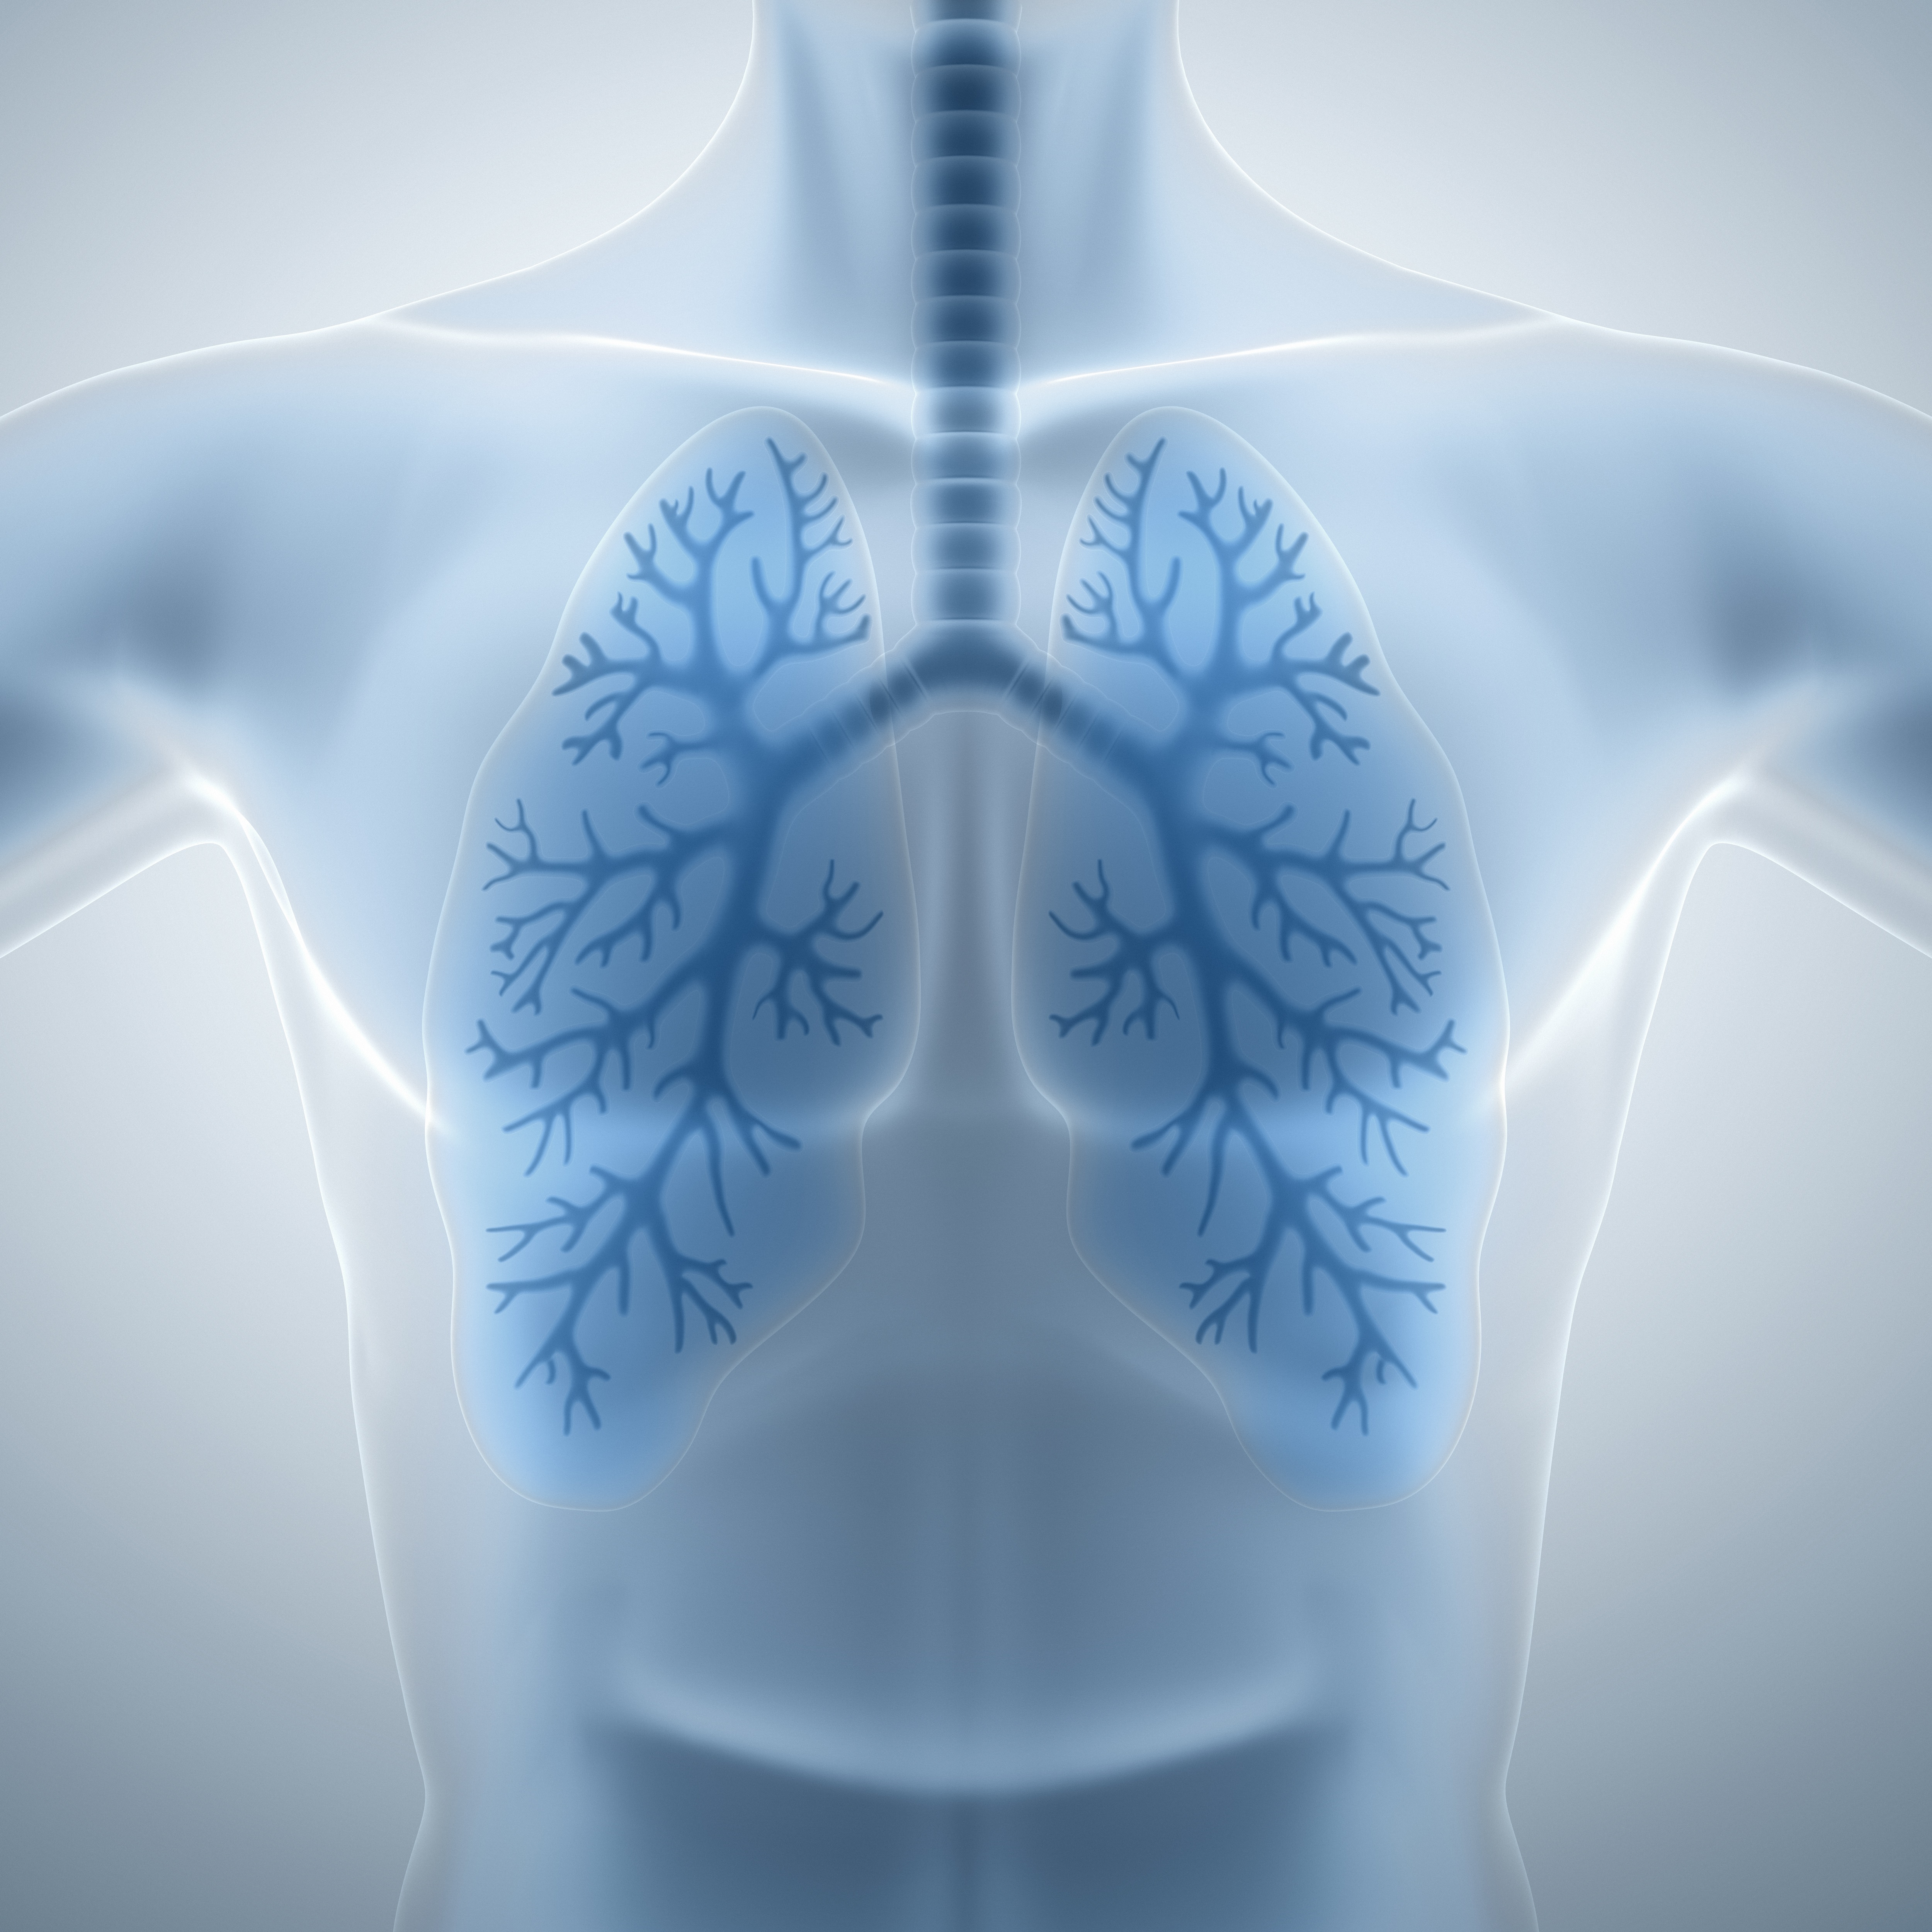 Metabolic Fingerprints May Correlate With Disease Progression in Cystic Fibrosis